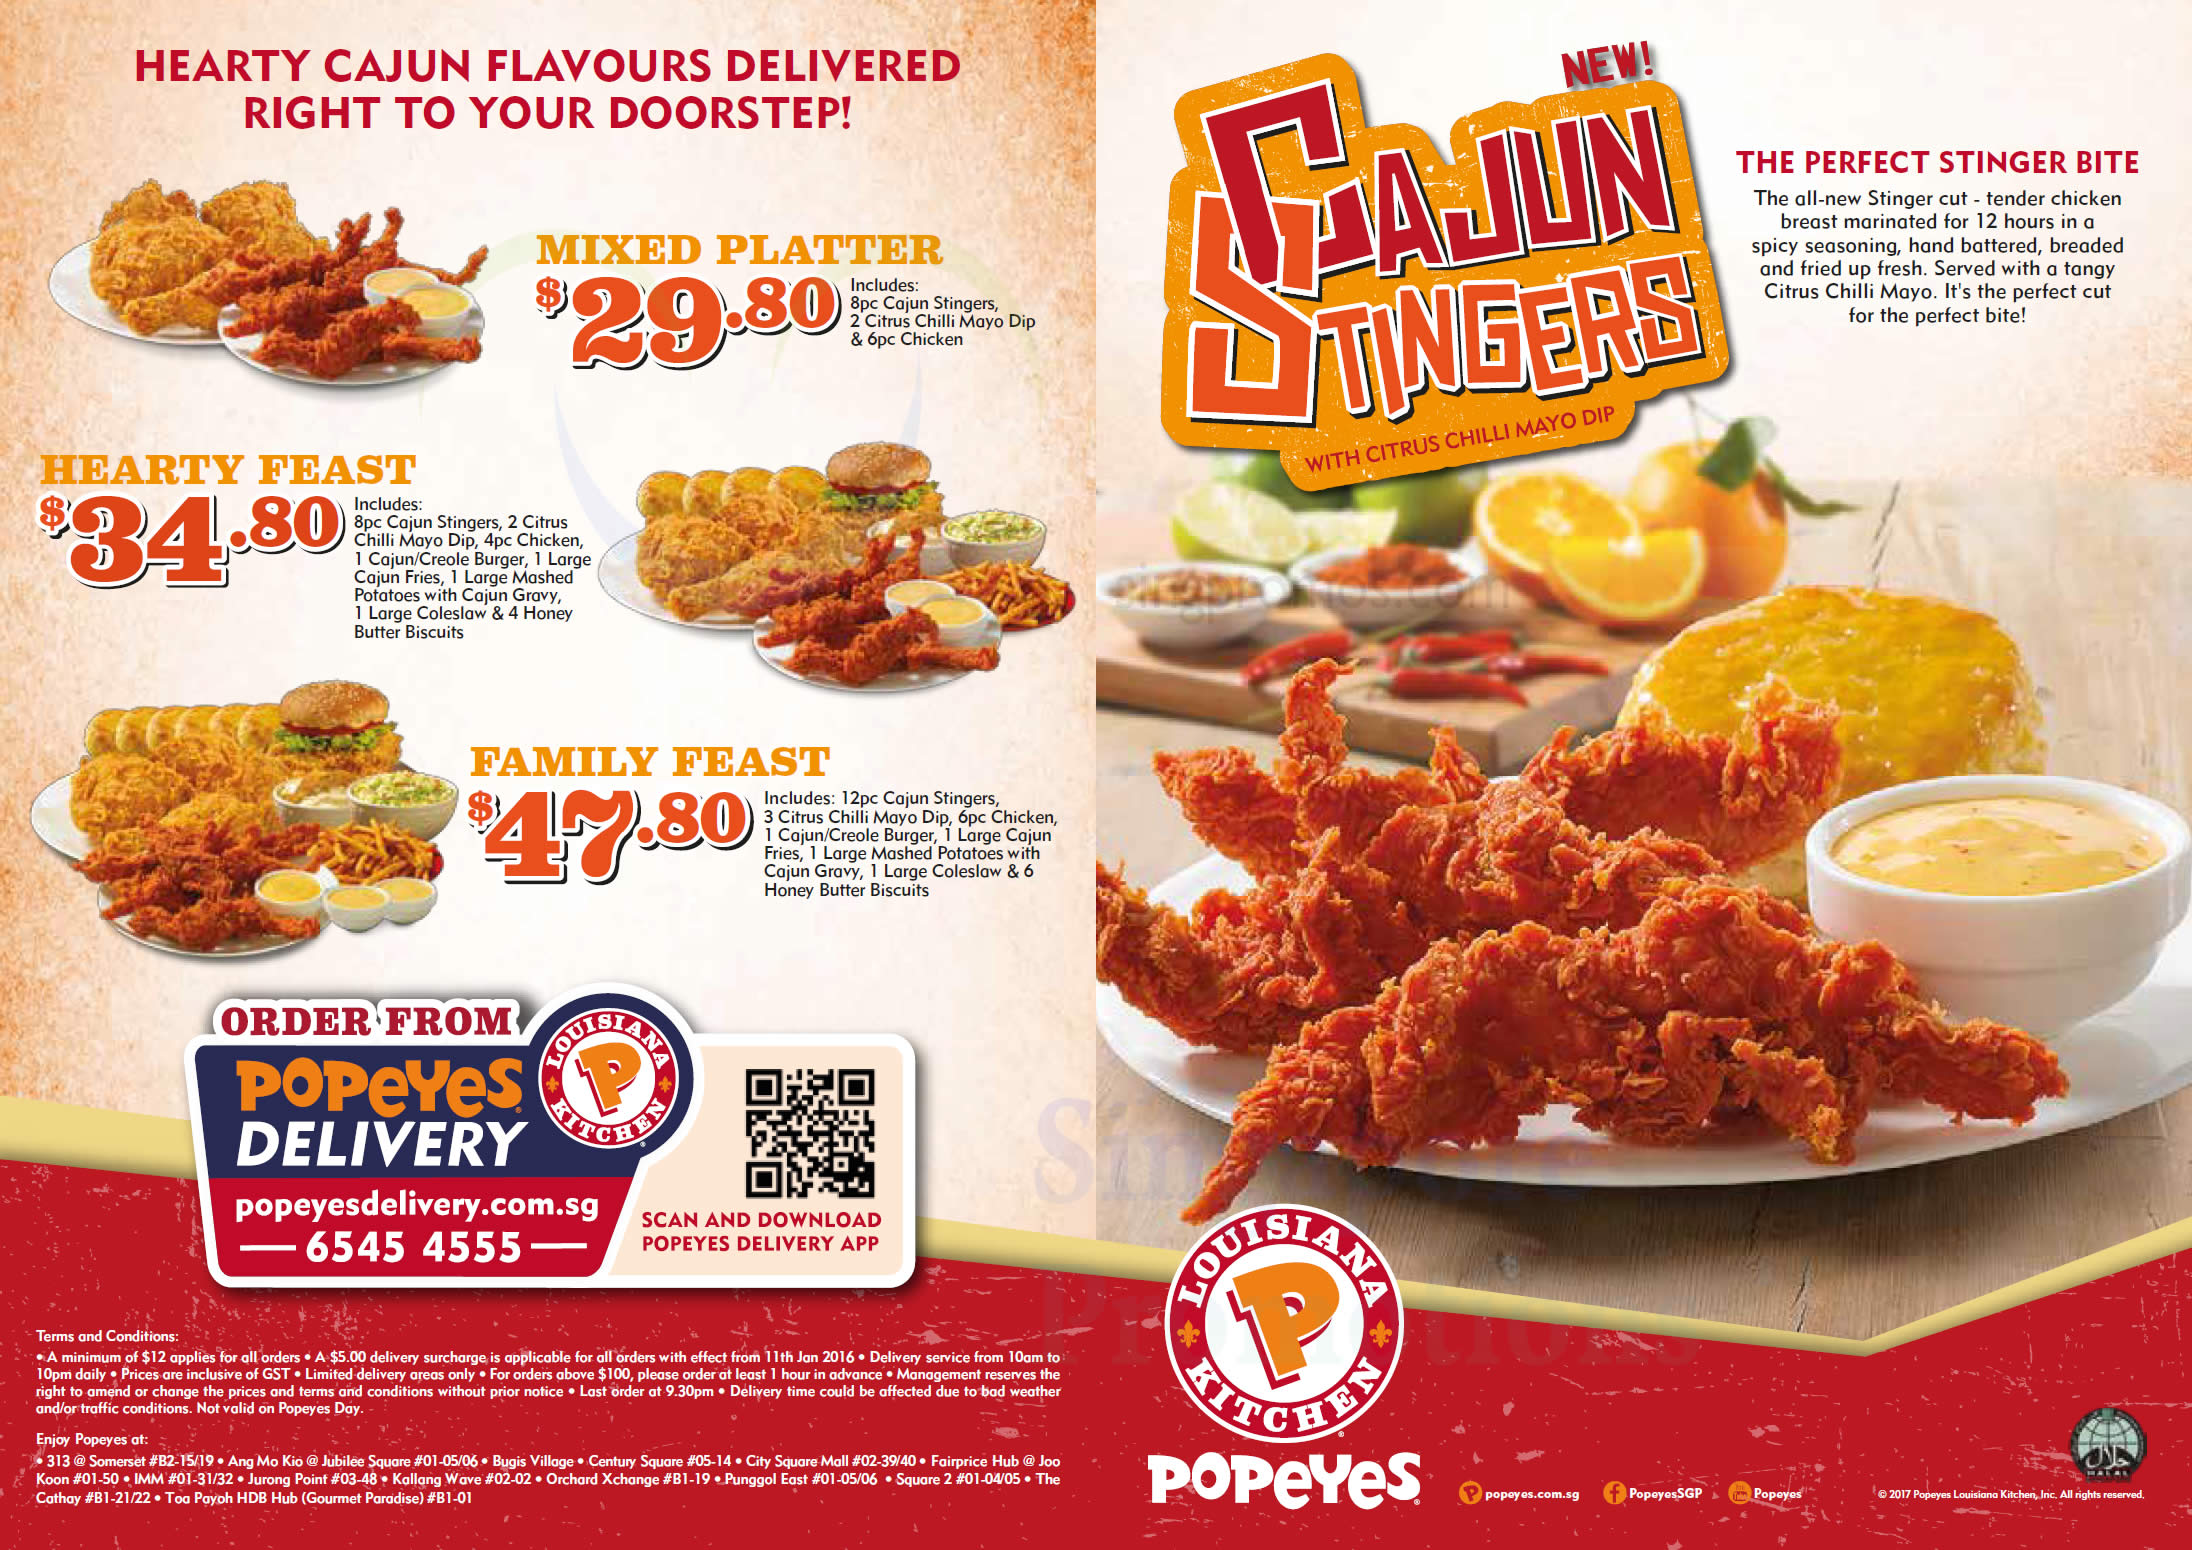 Here’s Popeyes latest discount coupon deals valid from 14 Feb – 3 Apr 20172192 x 1550